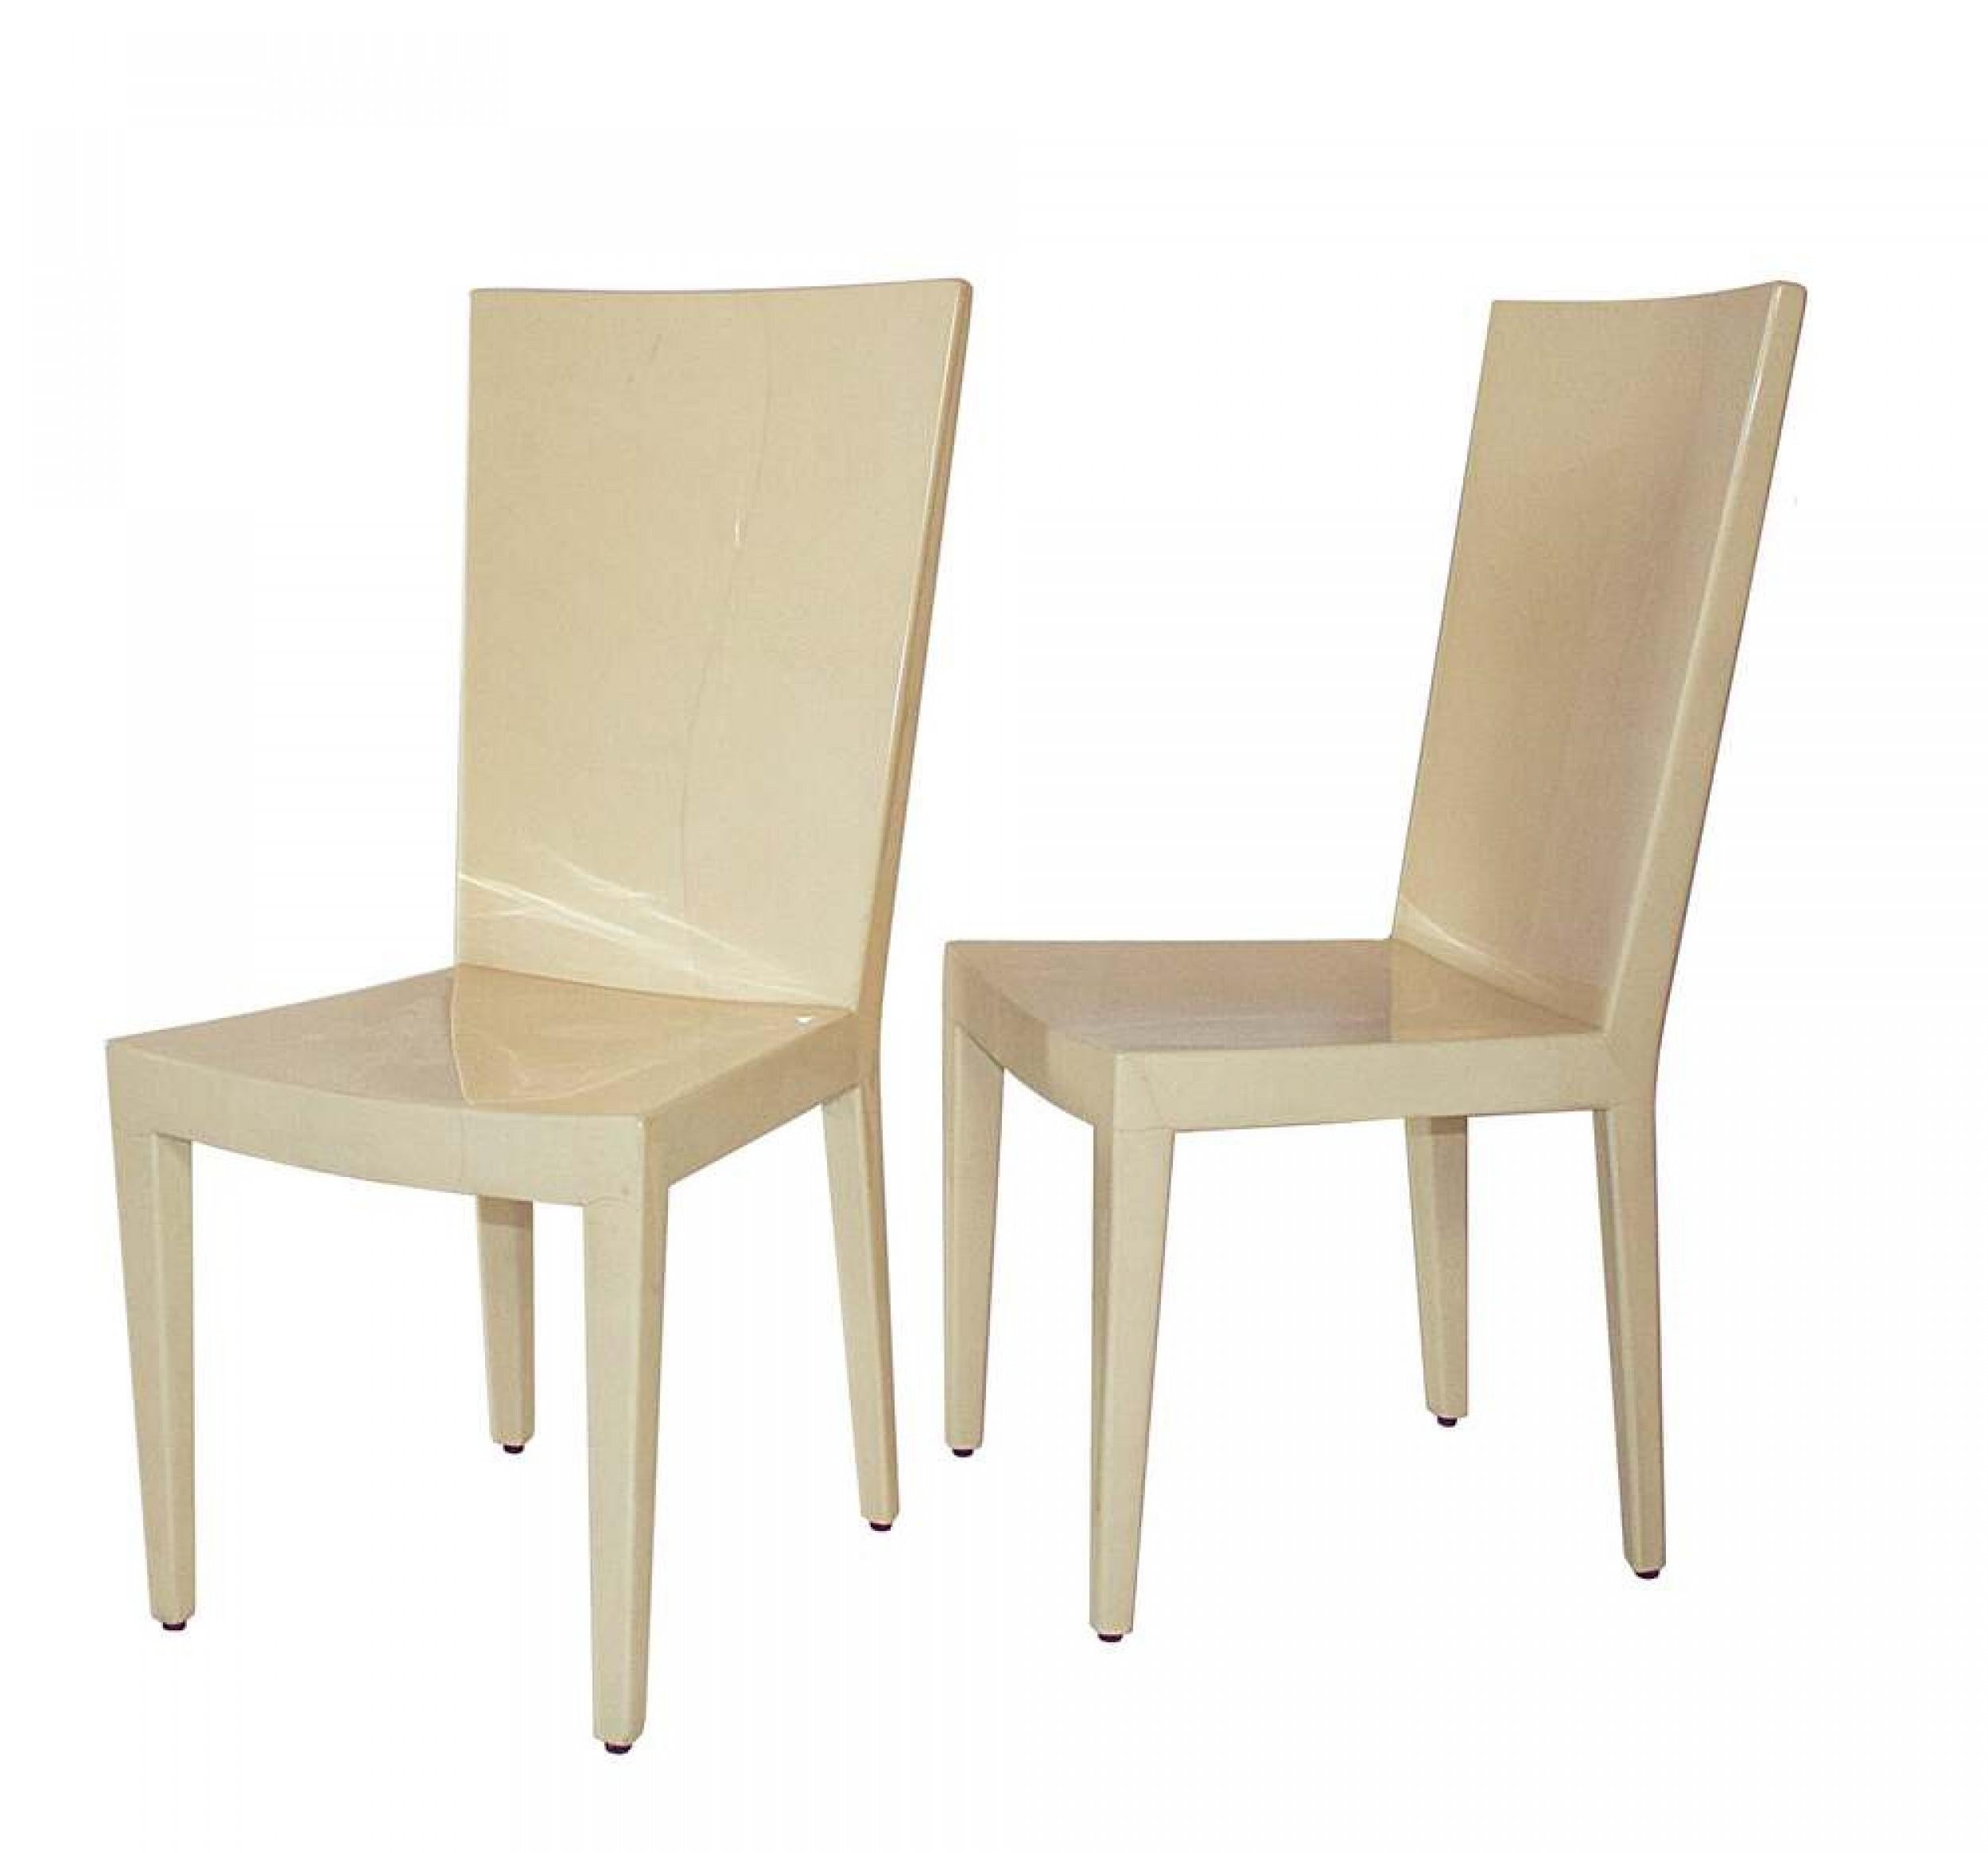 SET of 8 American Mid-Century Modern dining / side chairs with lacquered beige parchment veneers. (KARL SPRINGER)(PRICED AS SET)